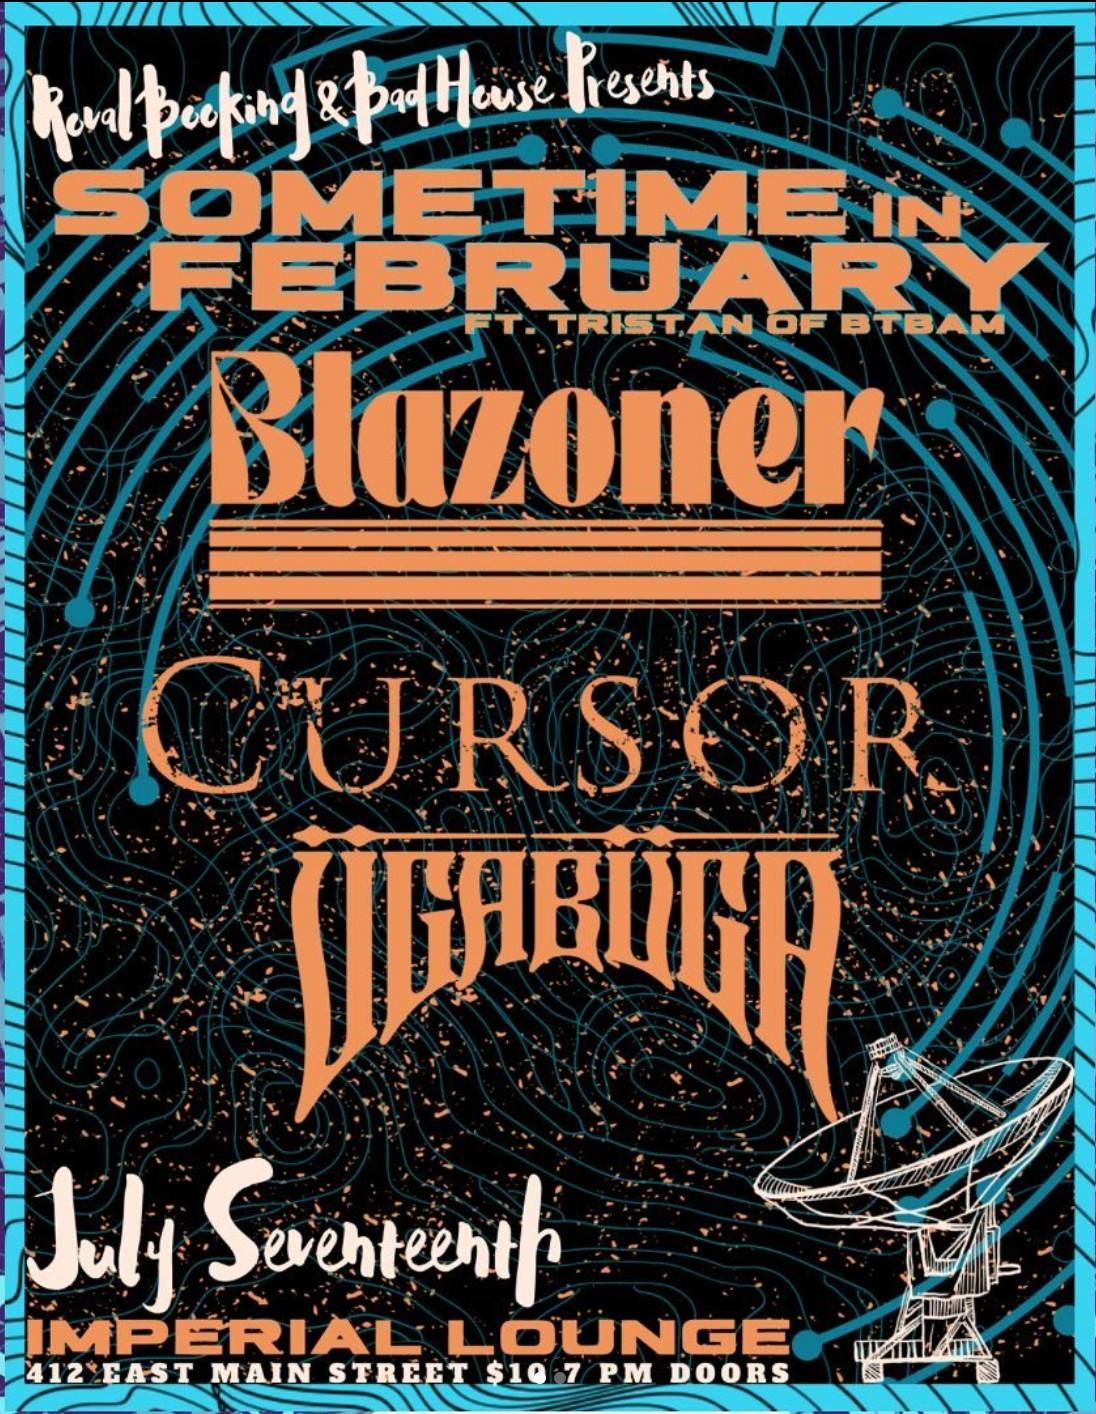 Sometime in February, Blazoner, Cursor, and Uga Buga at Imperial Lounge